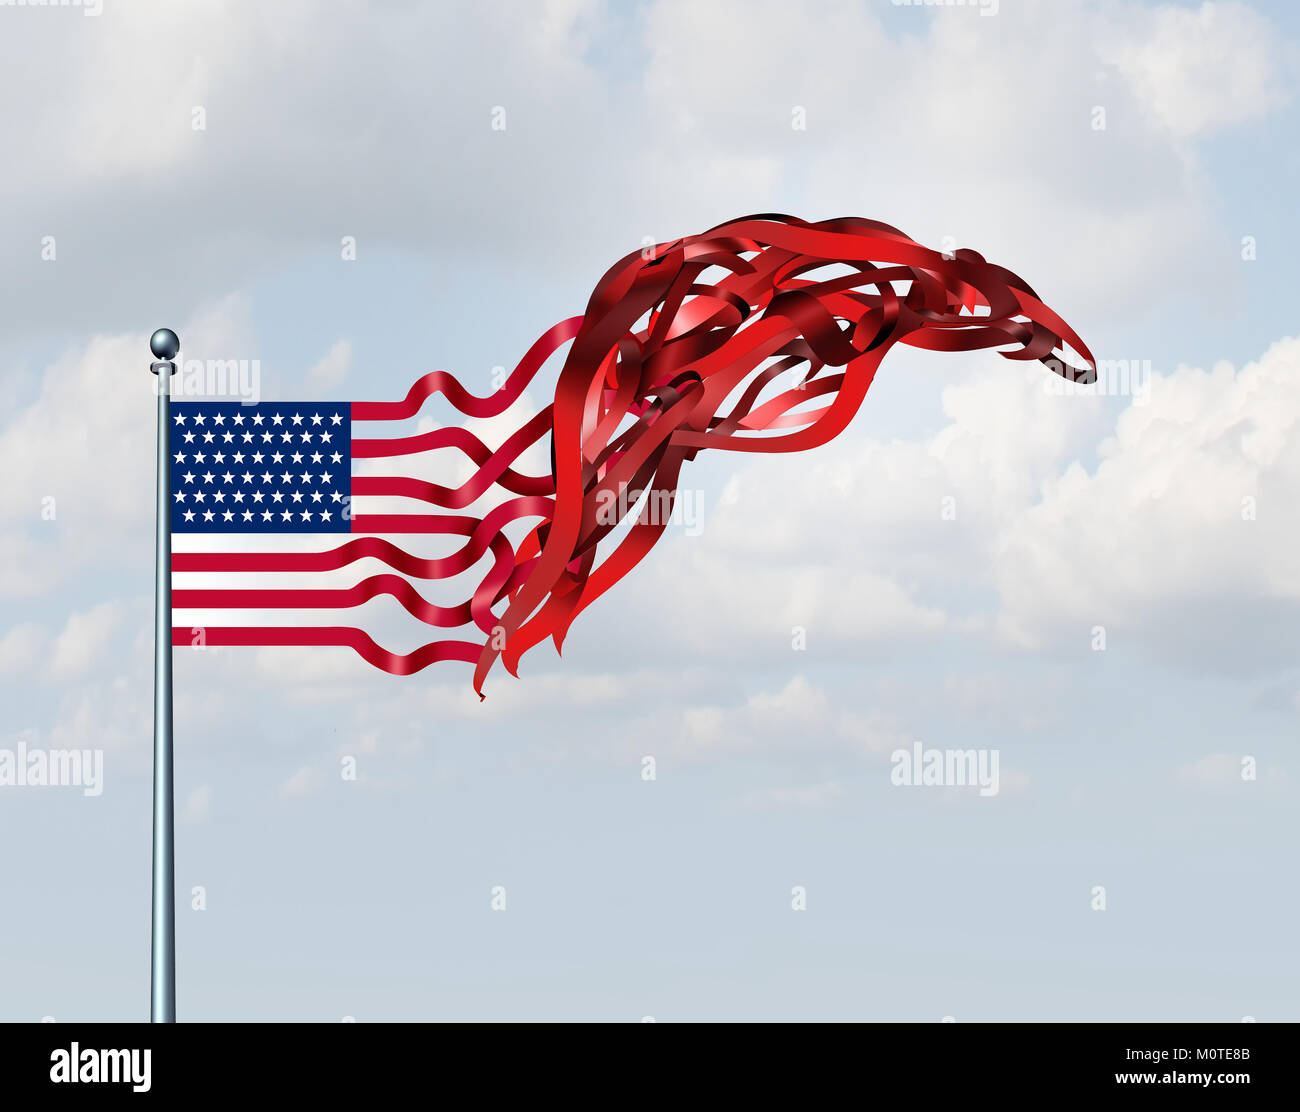 United States Government concept as an American flag as a political satire with 3D illustration elements. Stock Photo